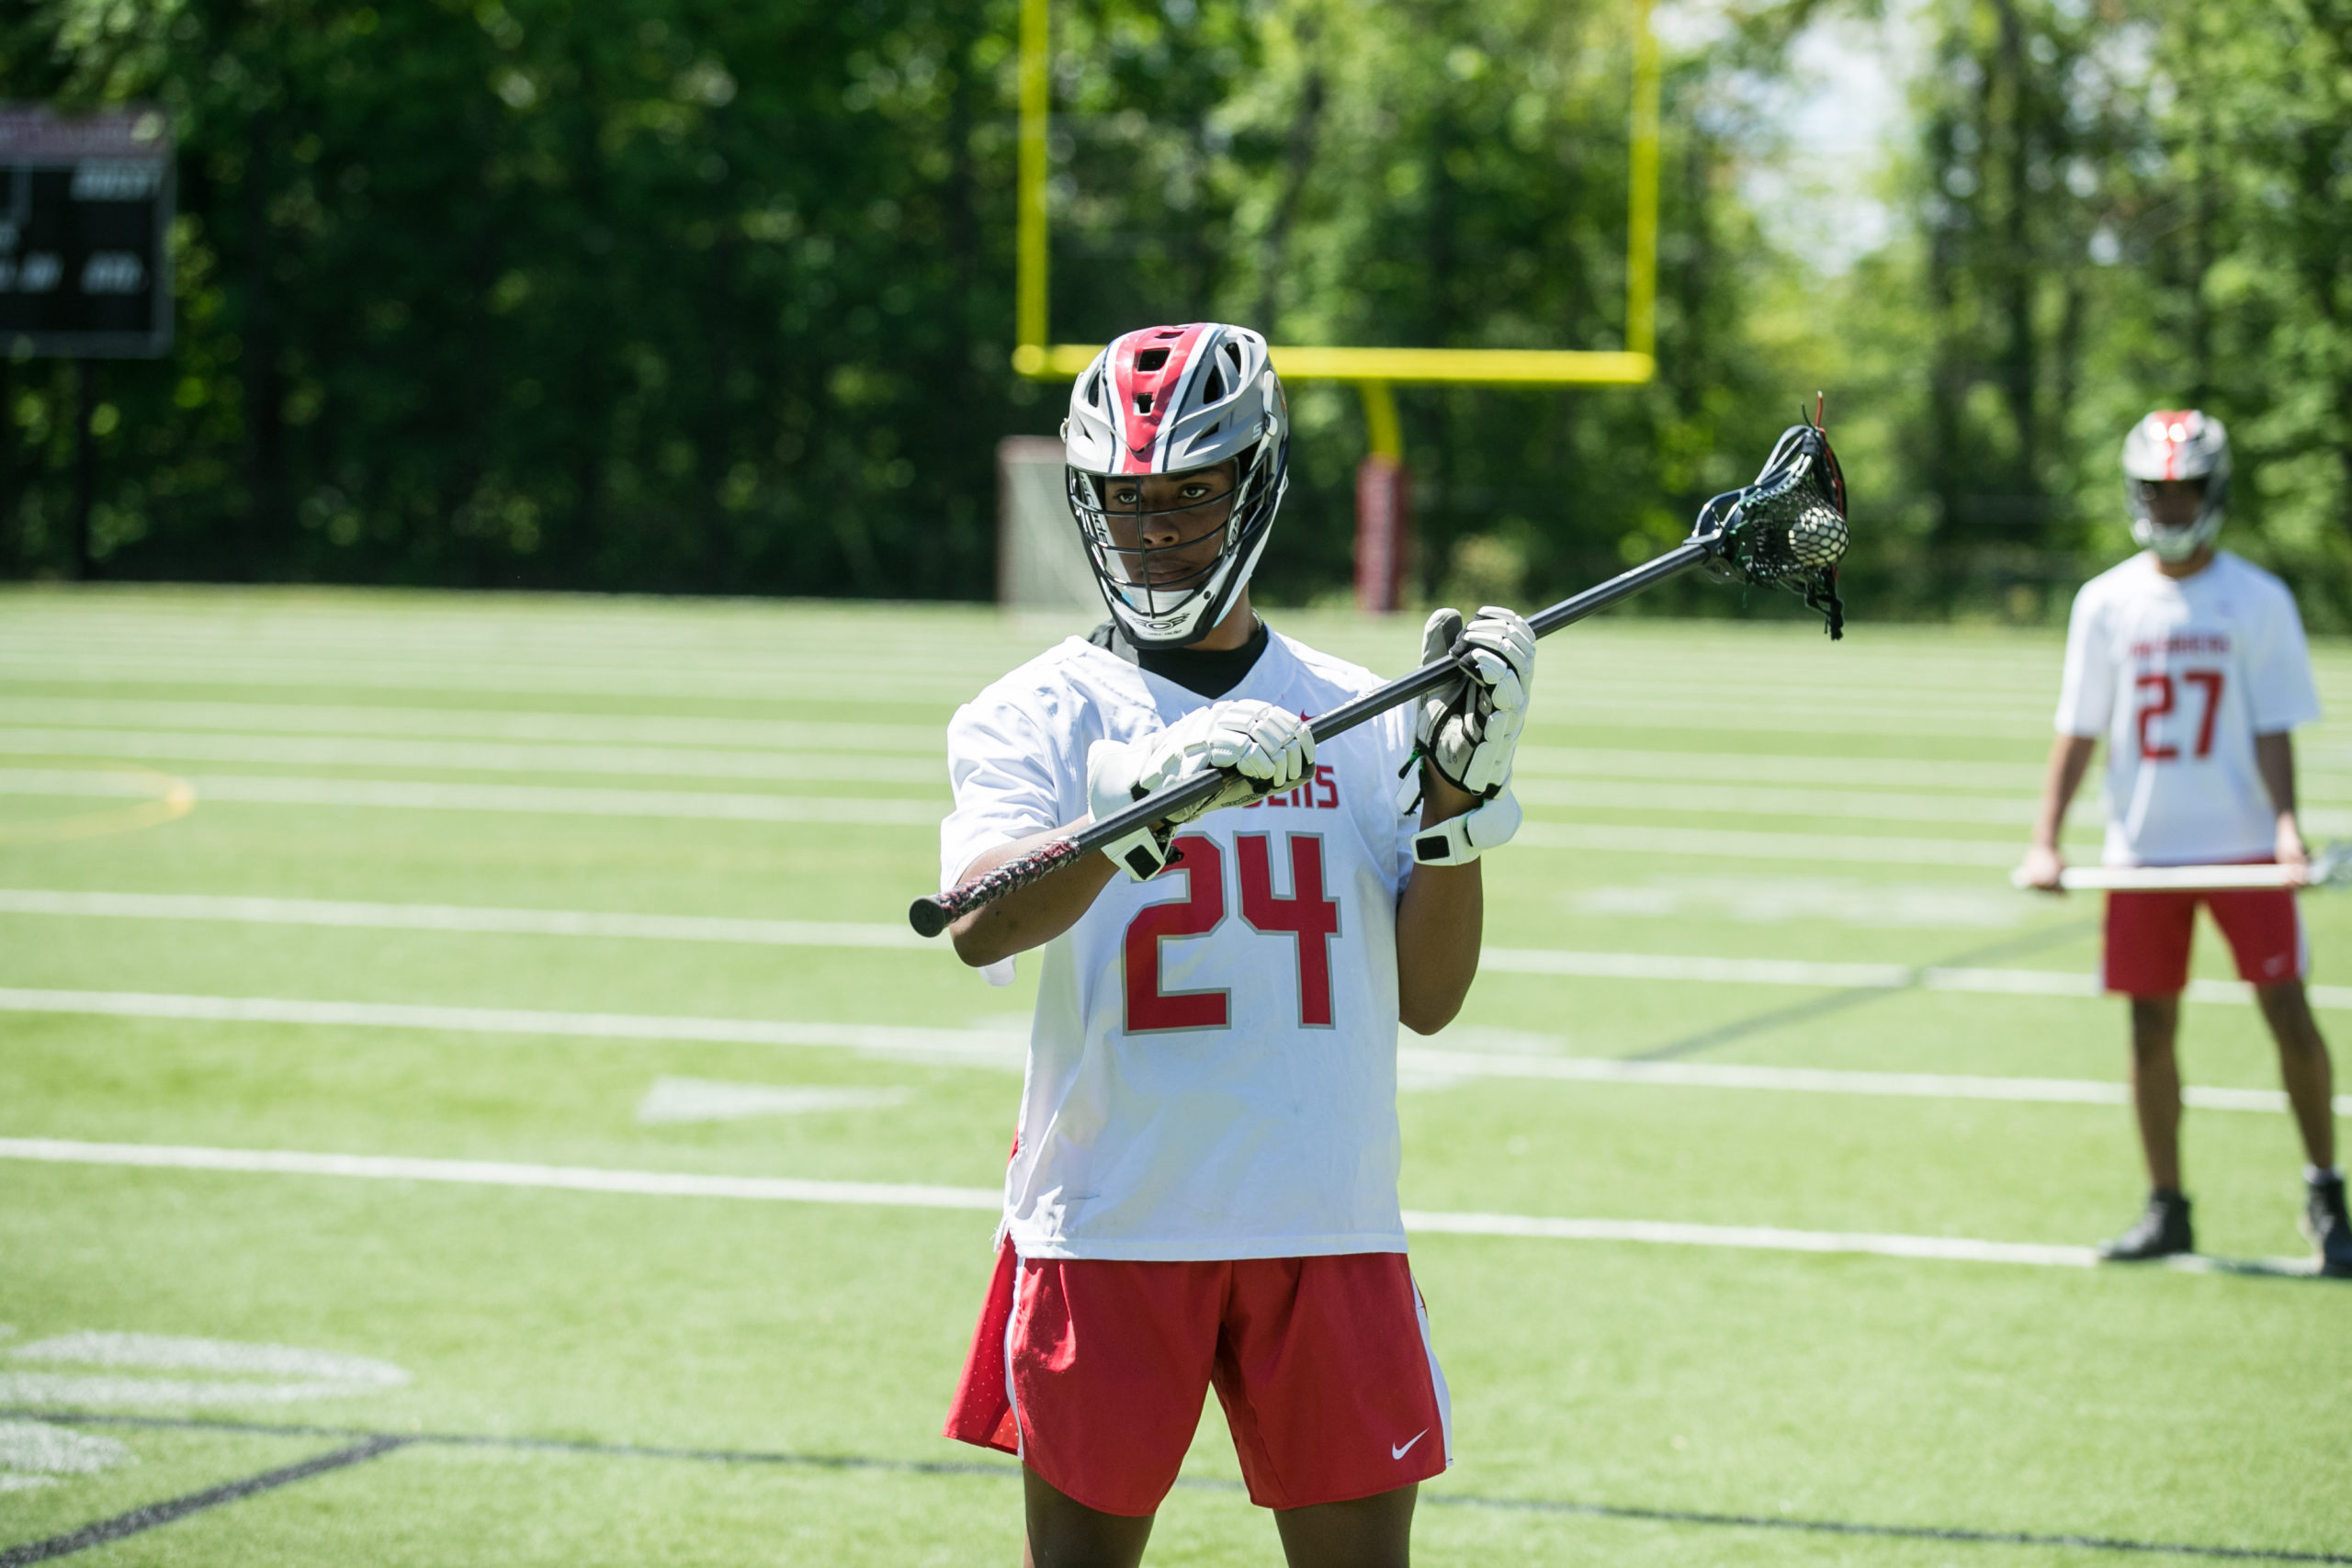 boys lacrosse player with lacrosse stick